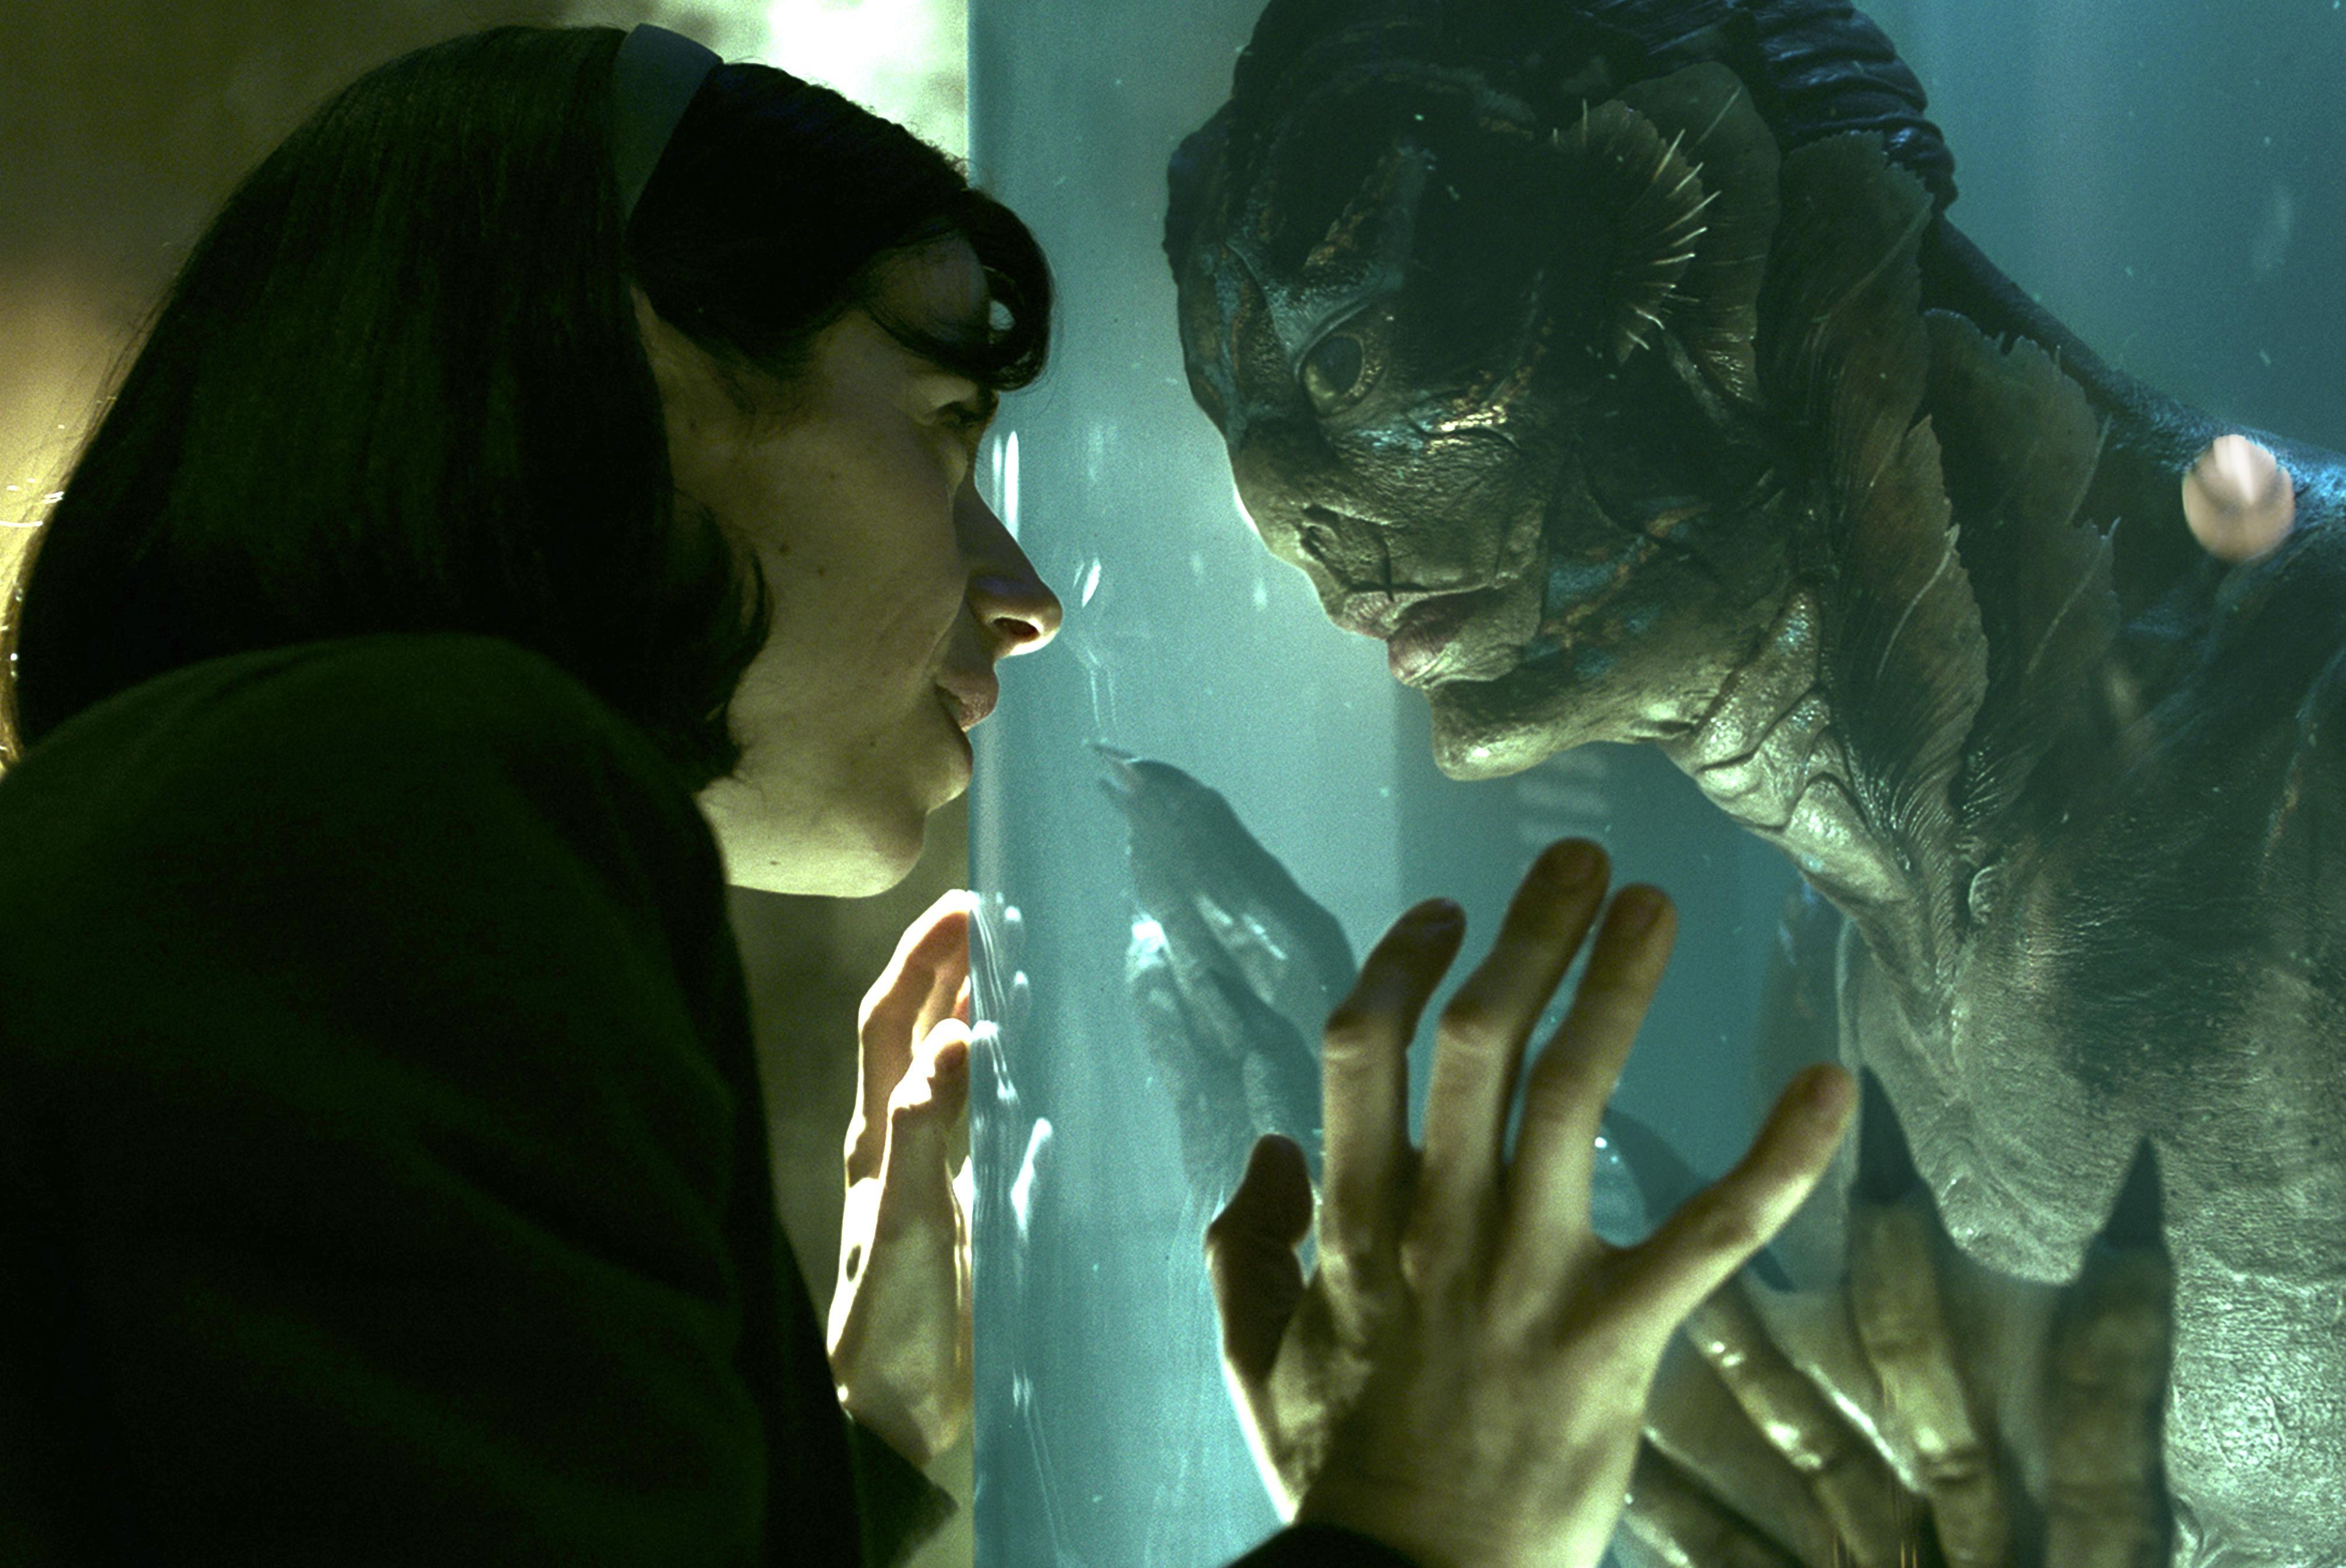 The Shape of Water 4k Ultra HD Wallpaper. Background Image